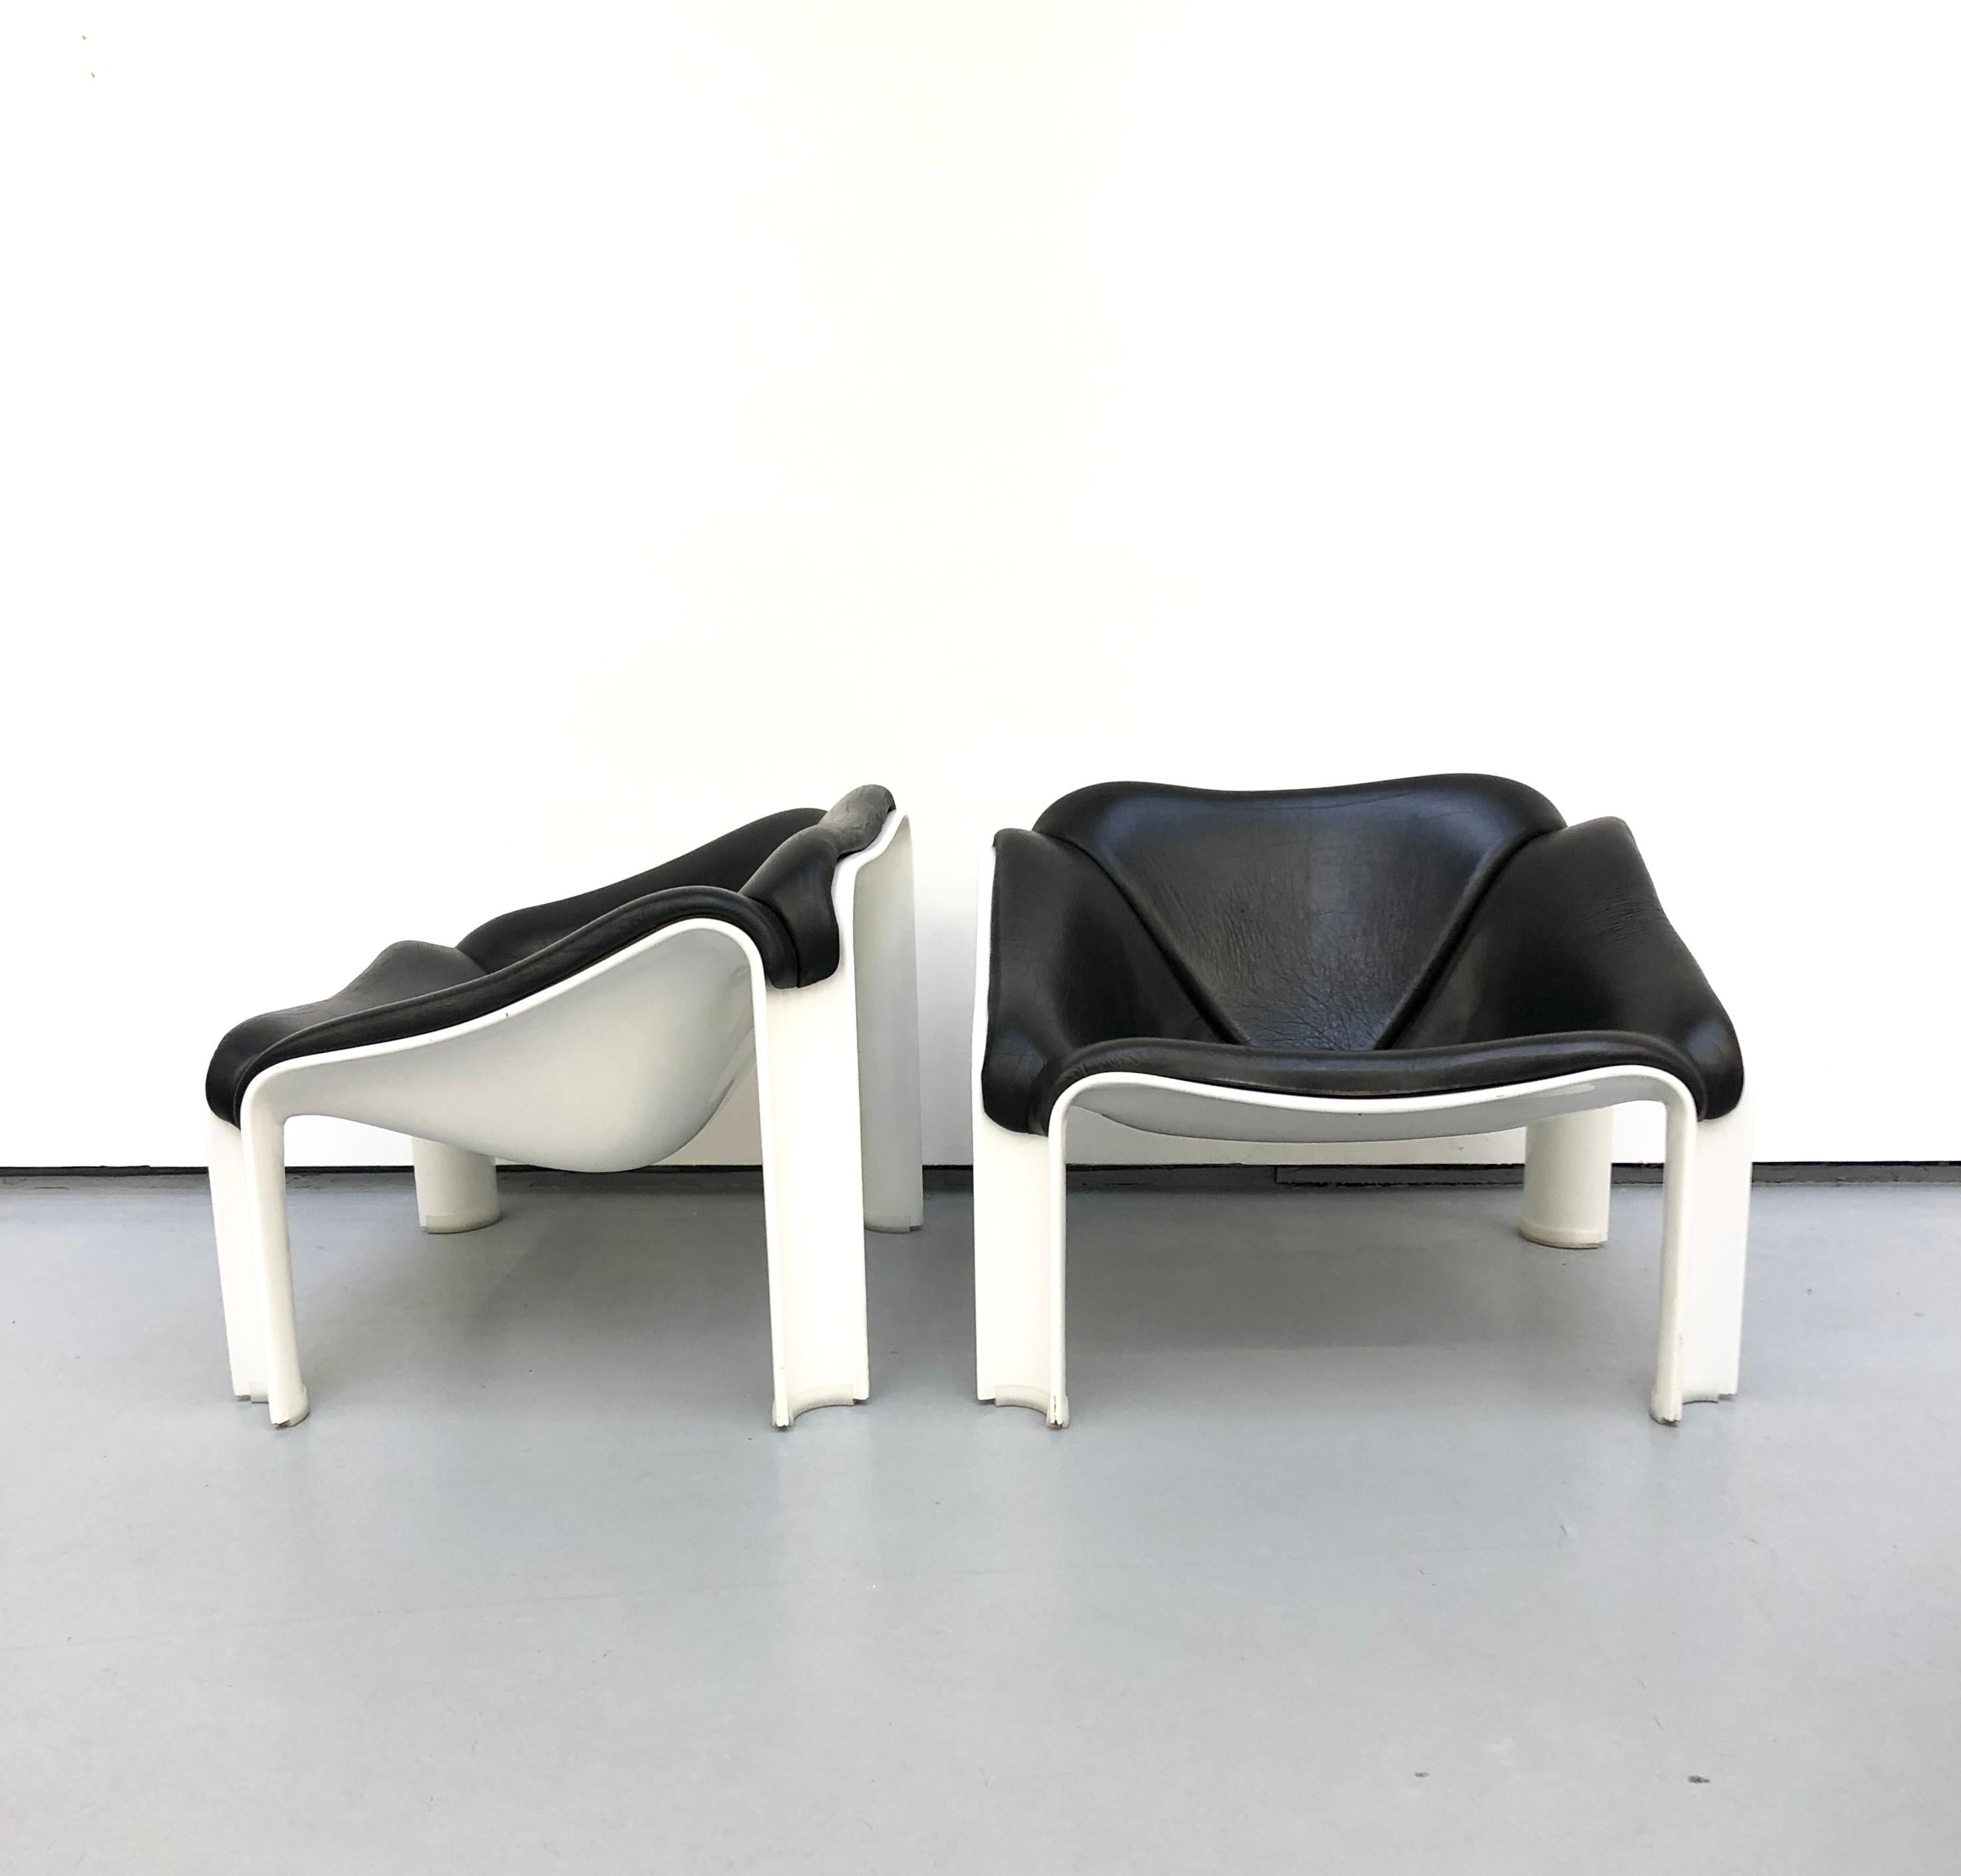 Pierre Paulin designed the F300 chair in 1964 for Artifort (Netherlands). The F300 series by Pierre Paulin is made of a molded polyurethane shell. The legs are protected by transparent PVC caps. This chair has a free inlay shell that is upholstered